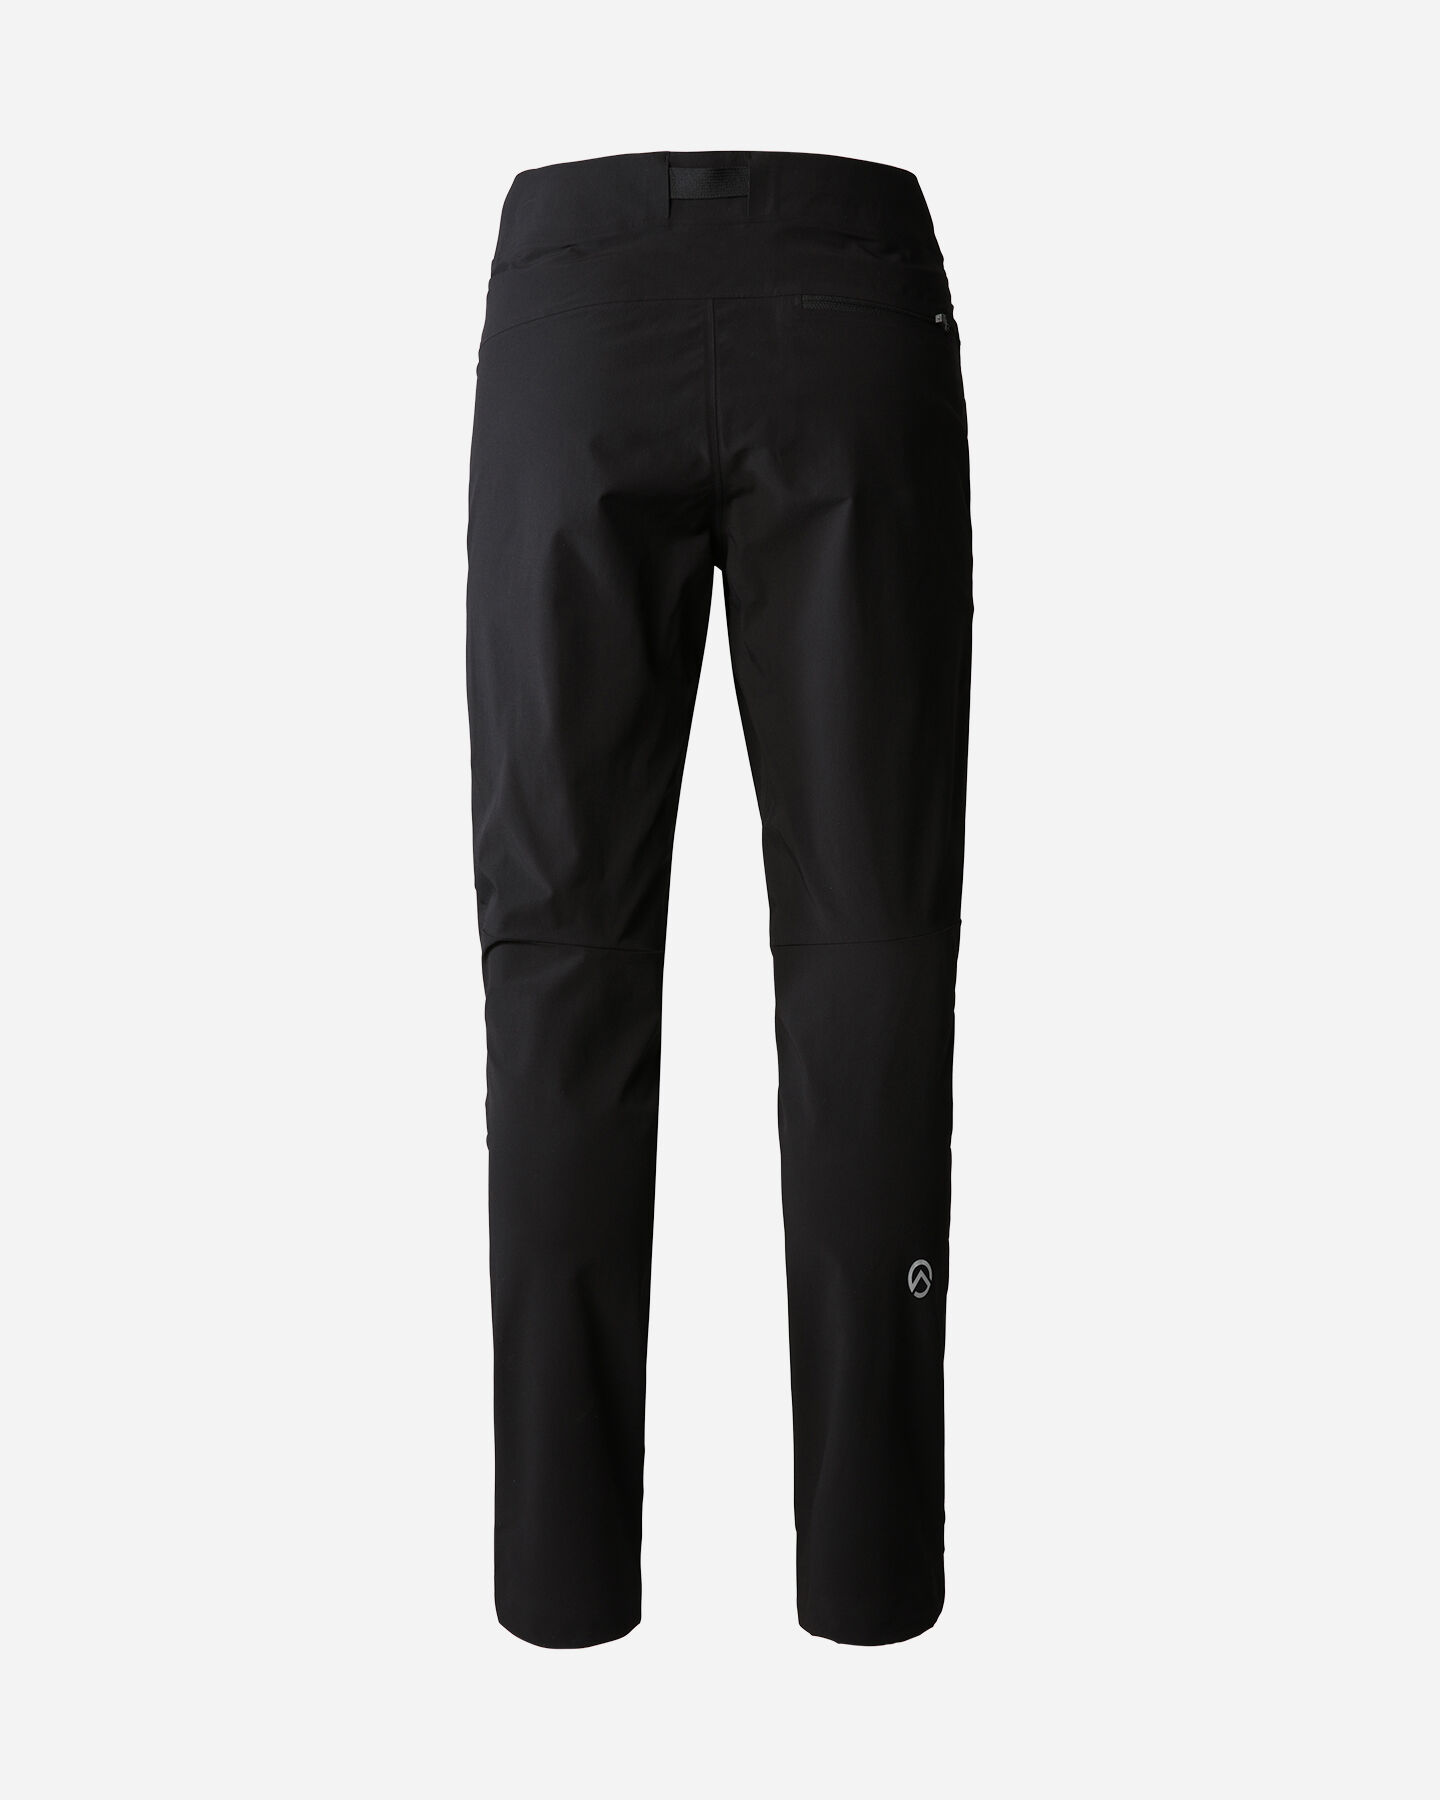  Pantalone outdoor THE NORTH FACE SUMMIT OFF WIDTH M S5537481|KX7|REG34 scatto 1